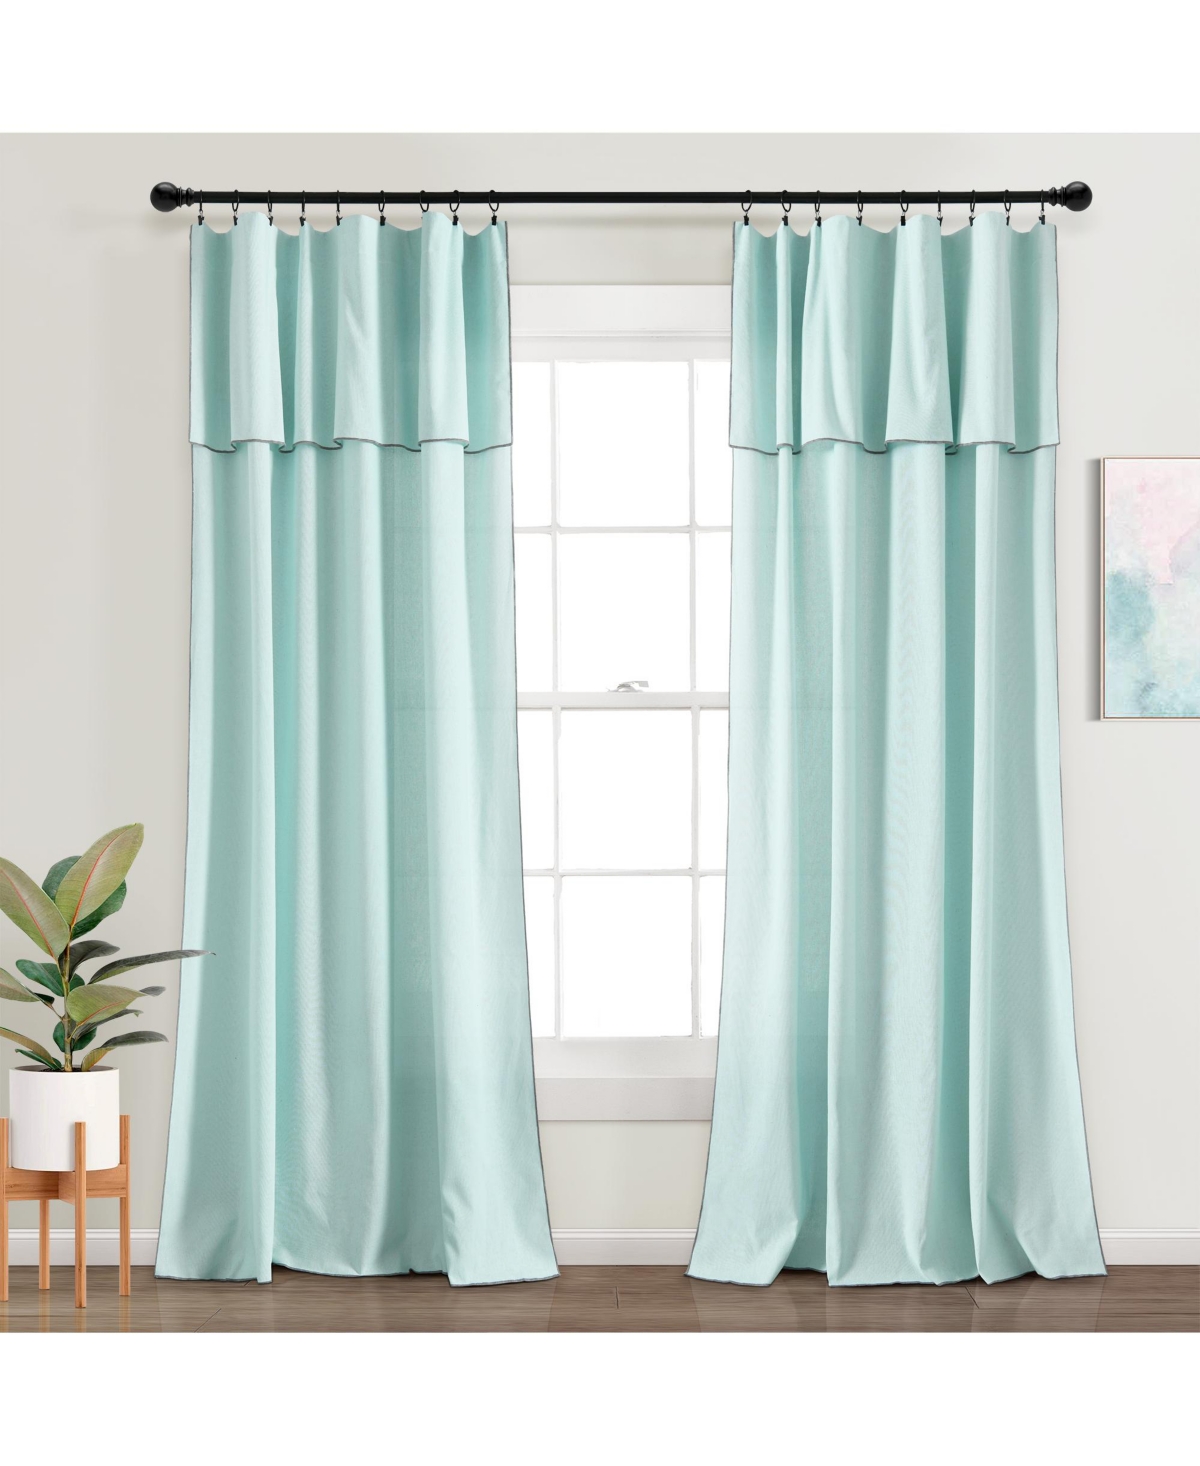 Lush Decor Modern Faux Linen Embroidered Edge With Attached Valance Window Curtain Panels In Blue